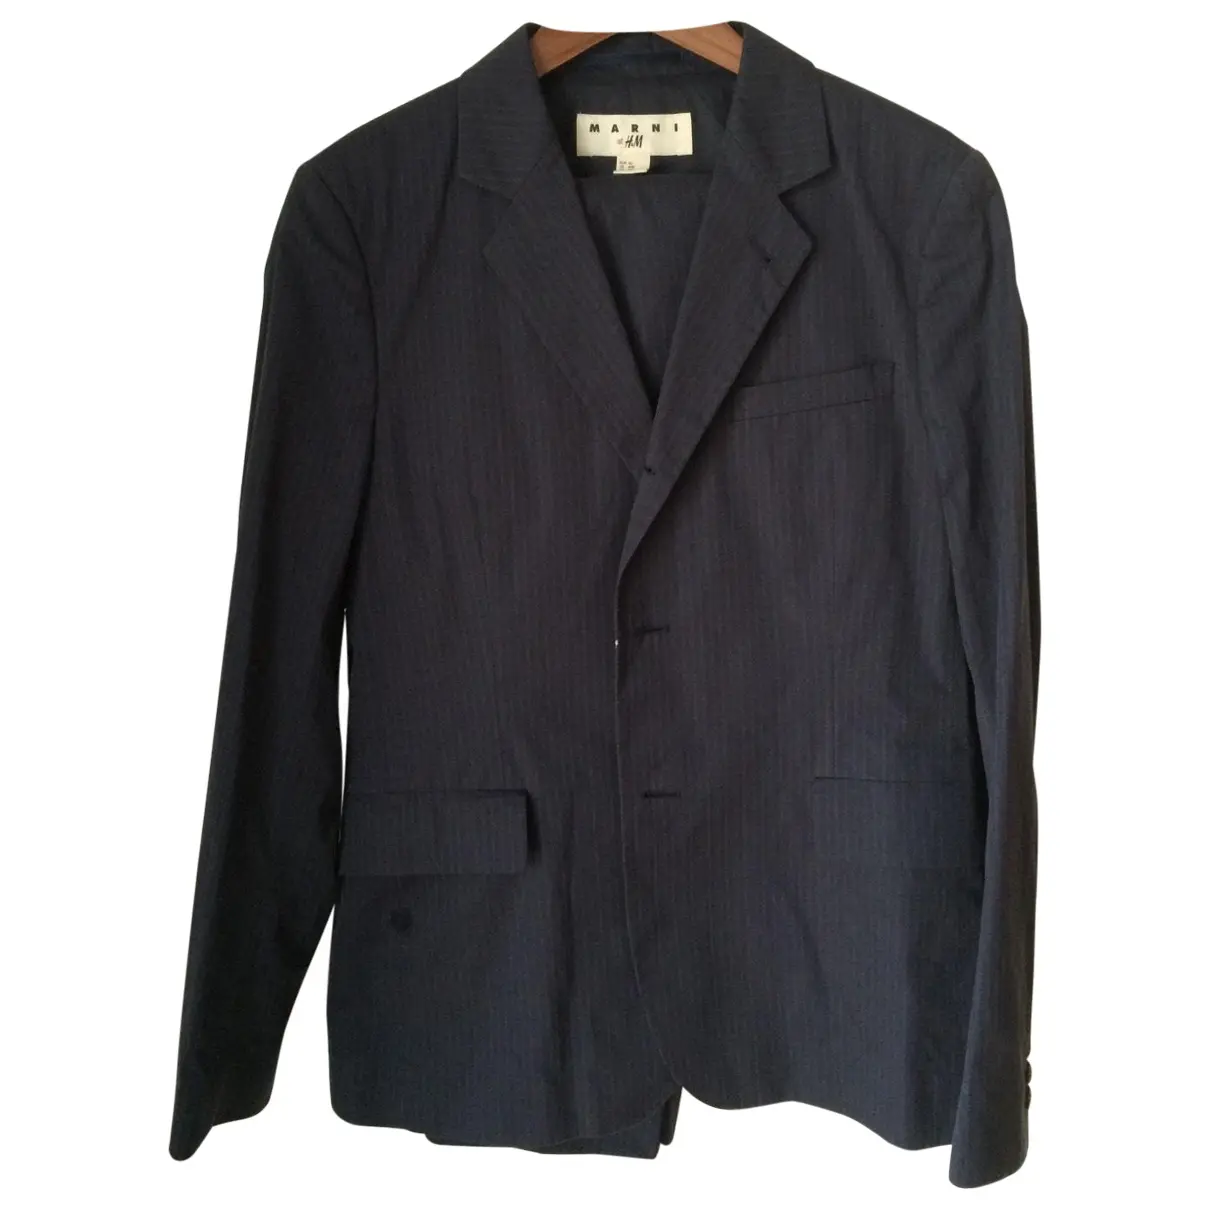 Navy Cotton Suit Marni For H&M